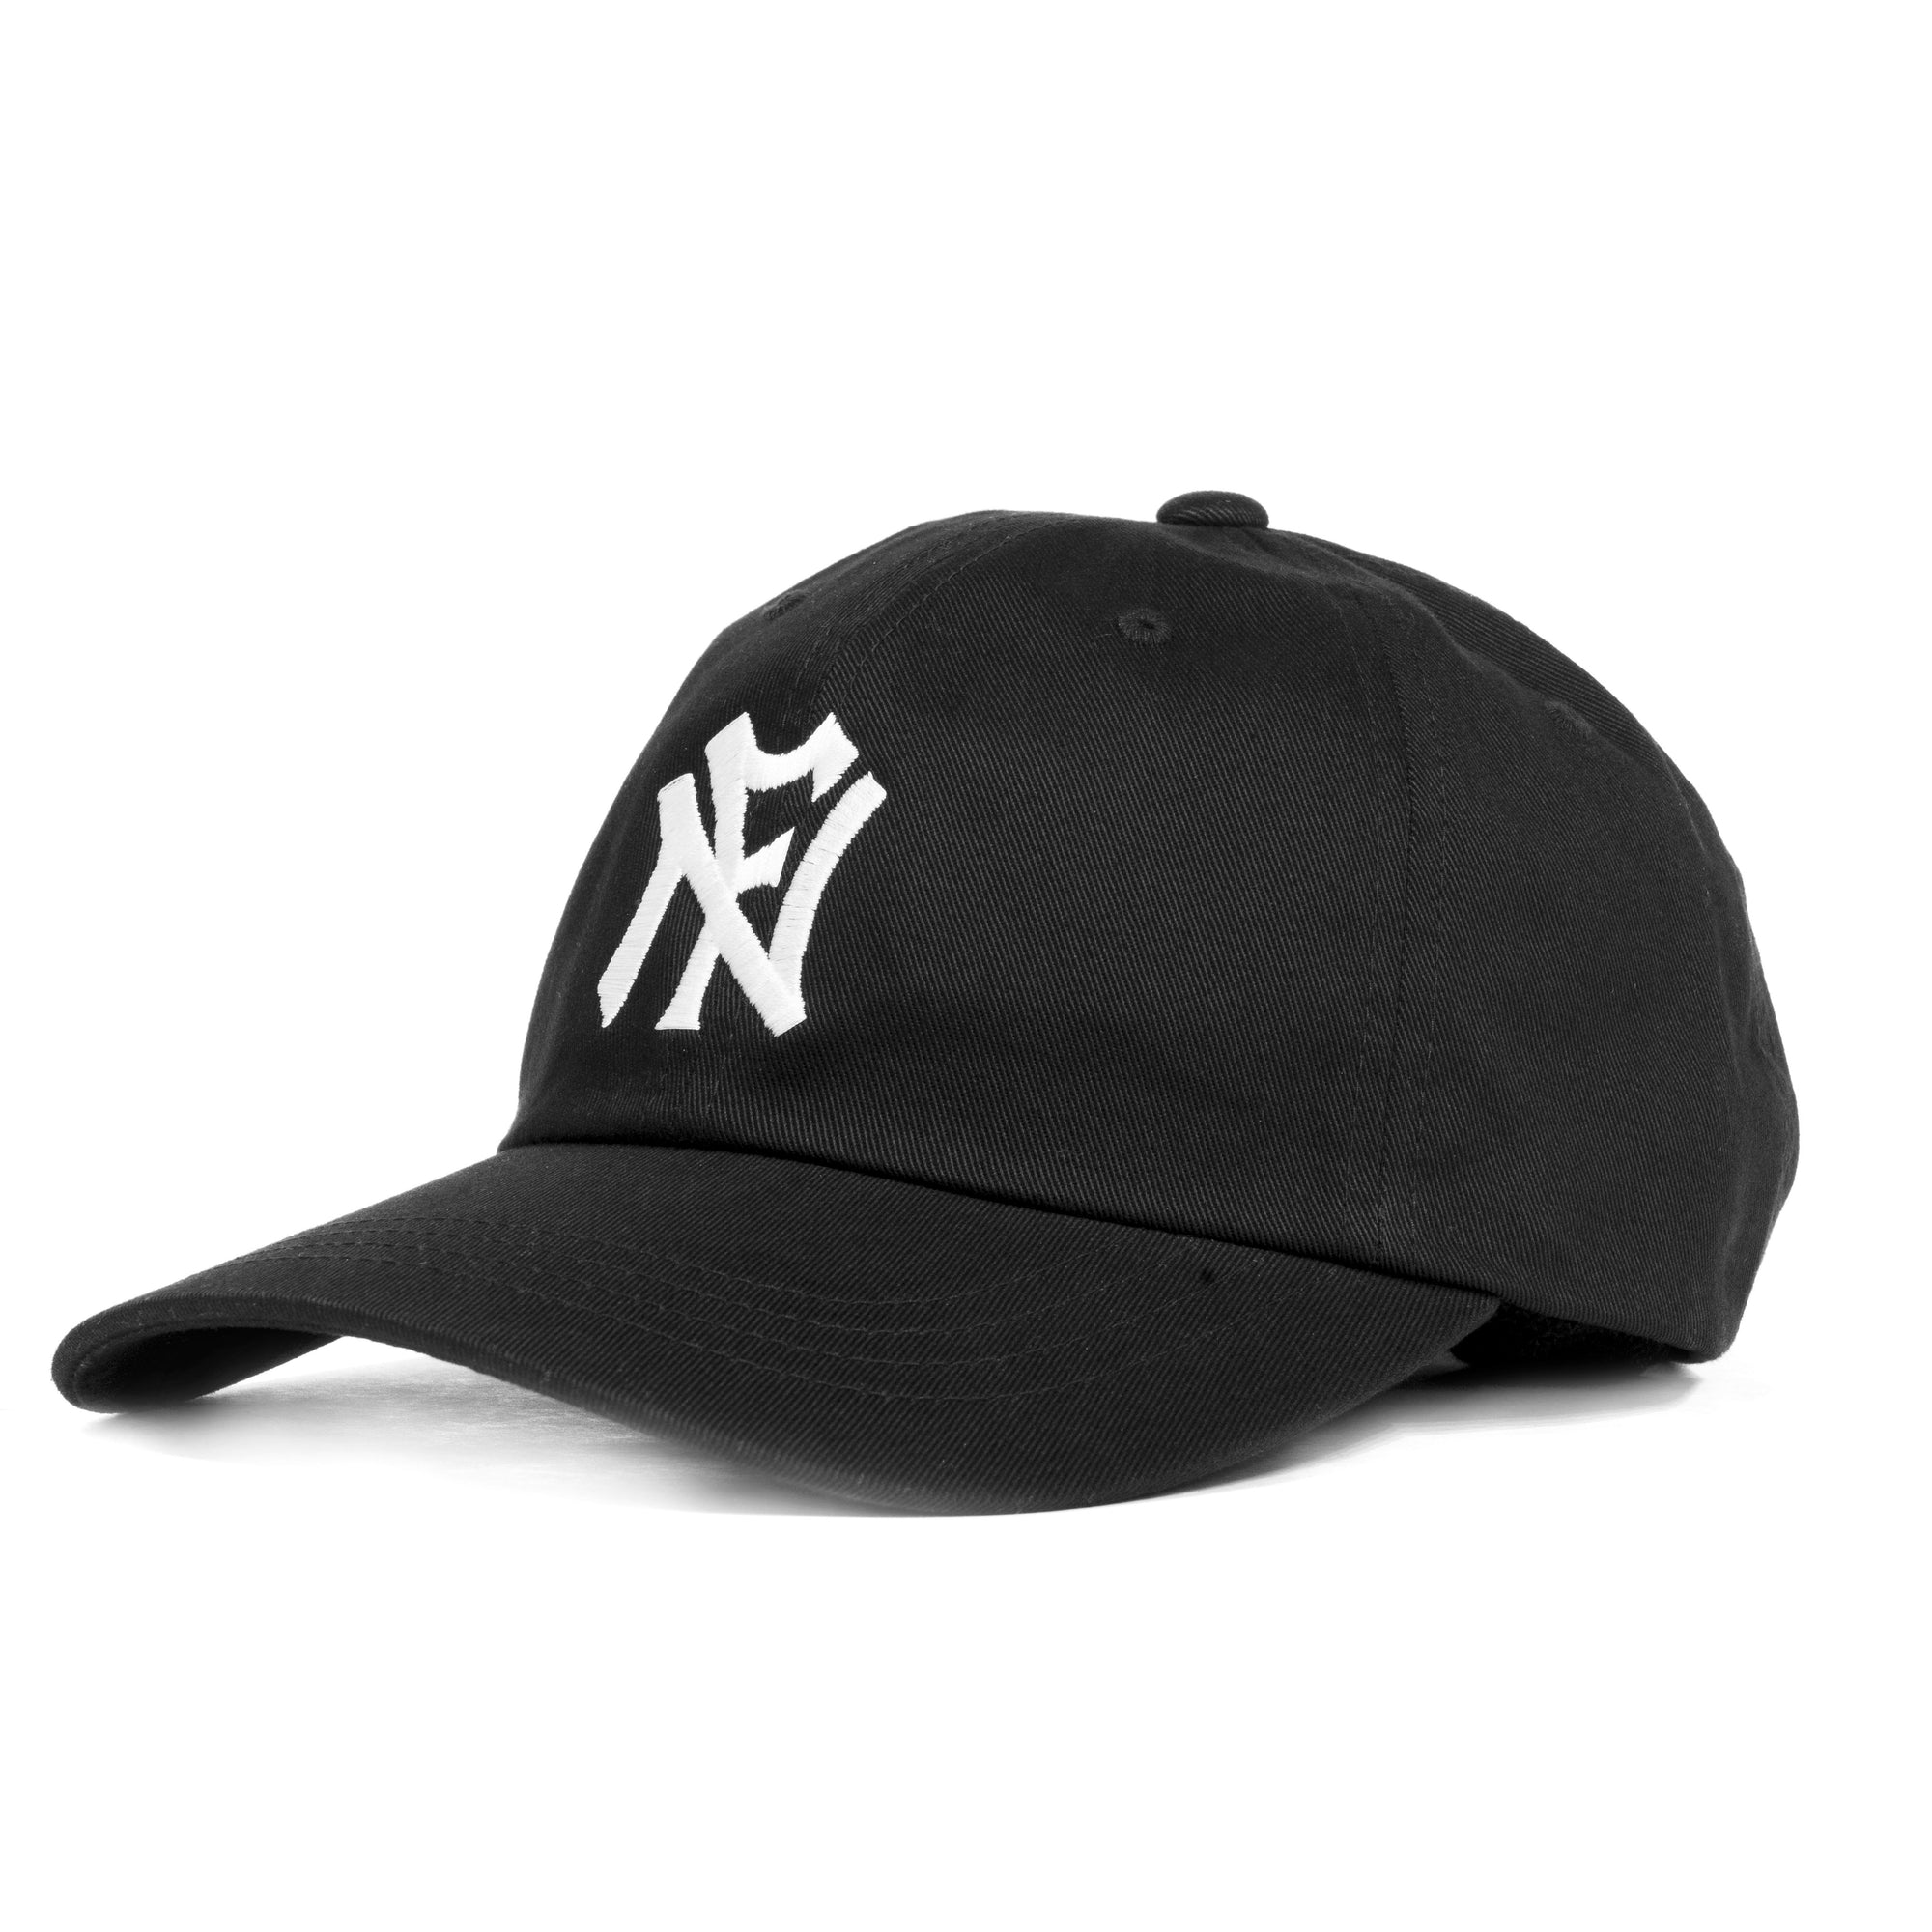 Black baseball cap featuring an embroidered N.F (No Fun®) logo in white, which references baseball logos. 